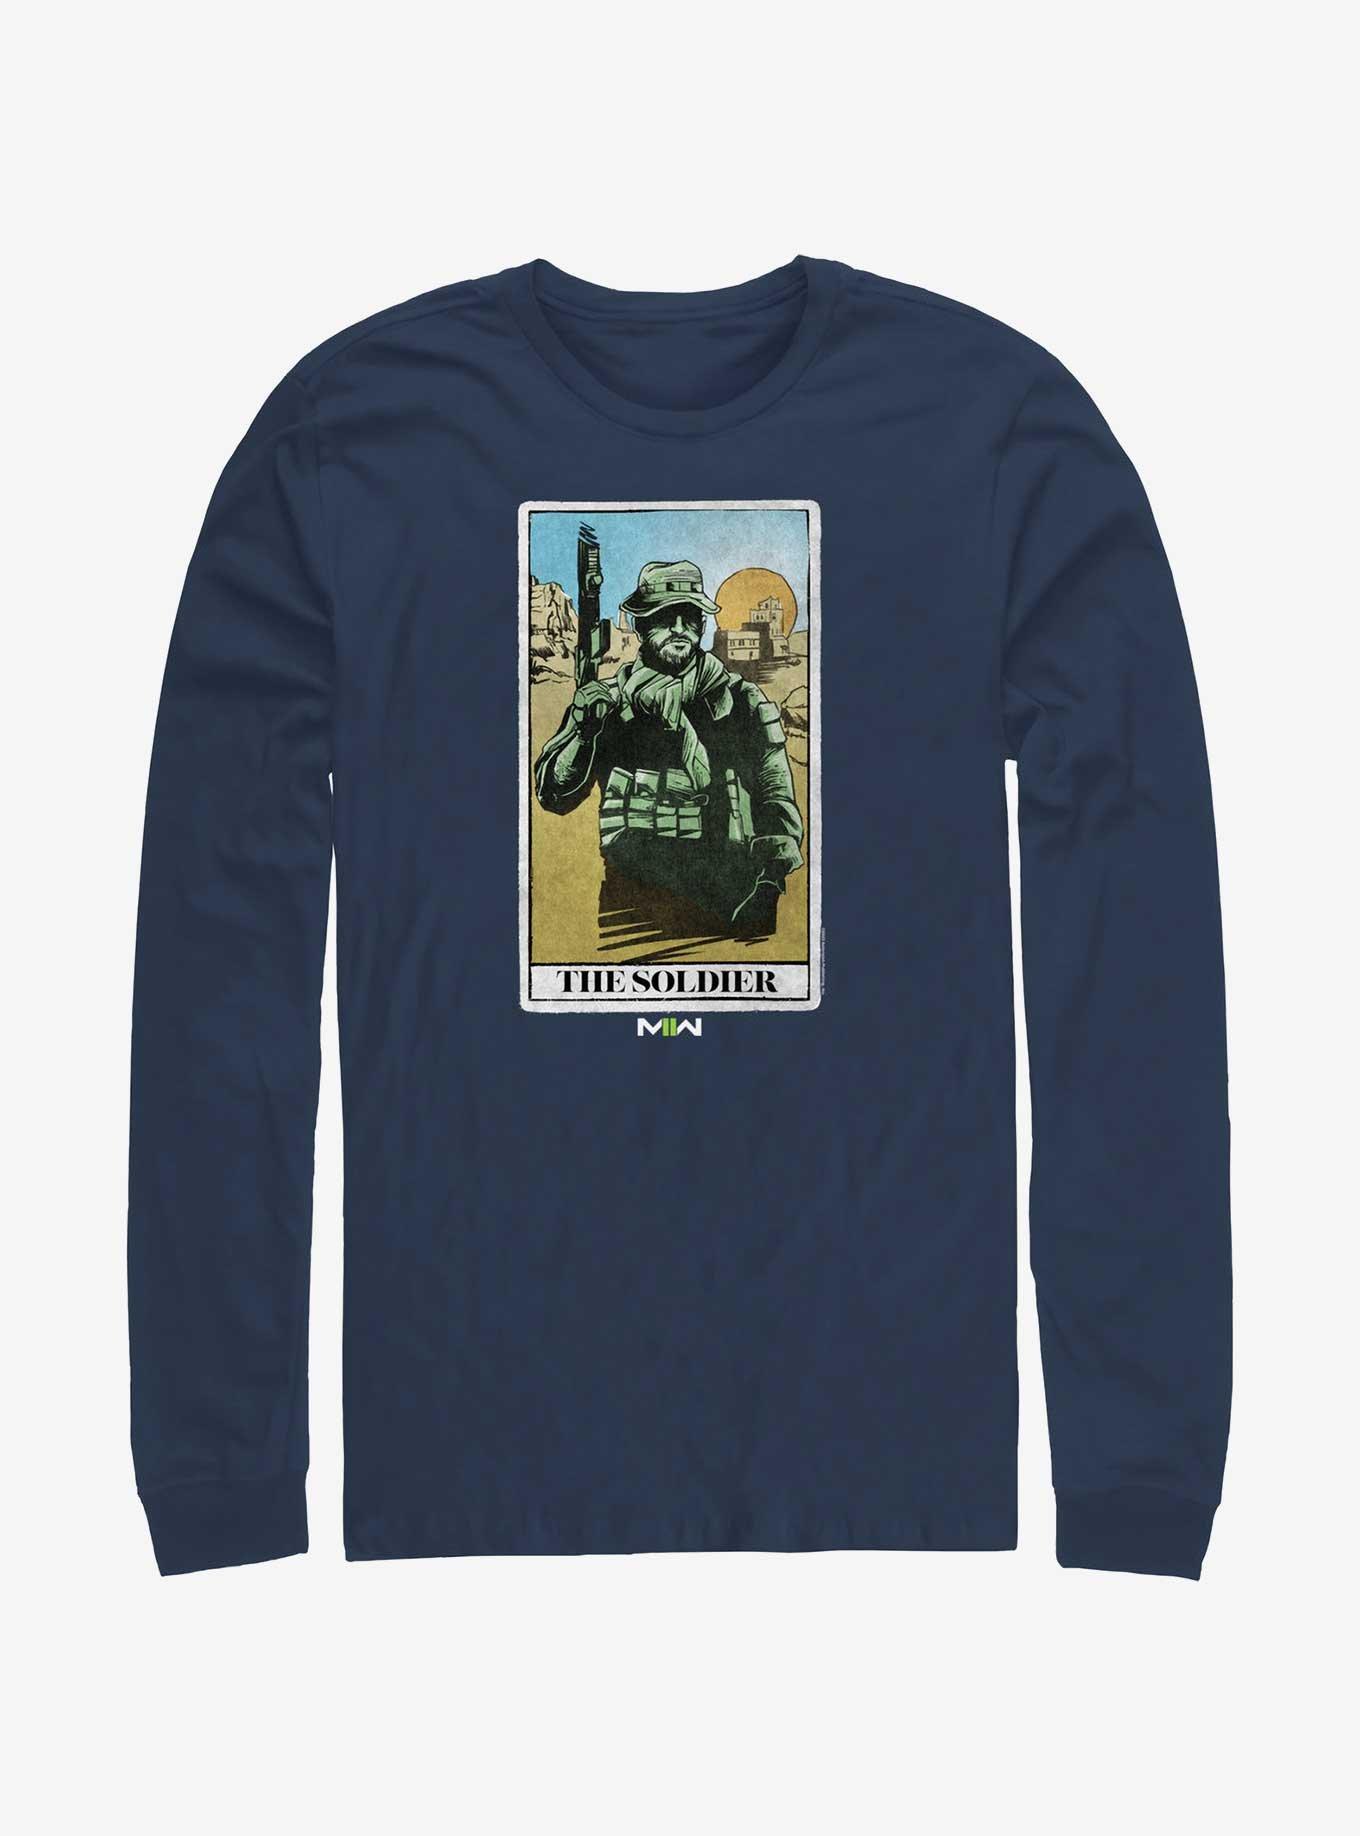 Call of Duty The Soldier Card Long-Sleeve T-Shirt, NAVY, hi-res